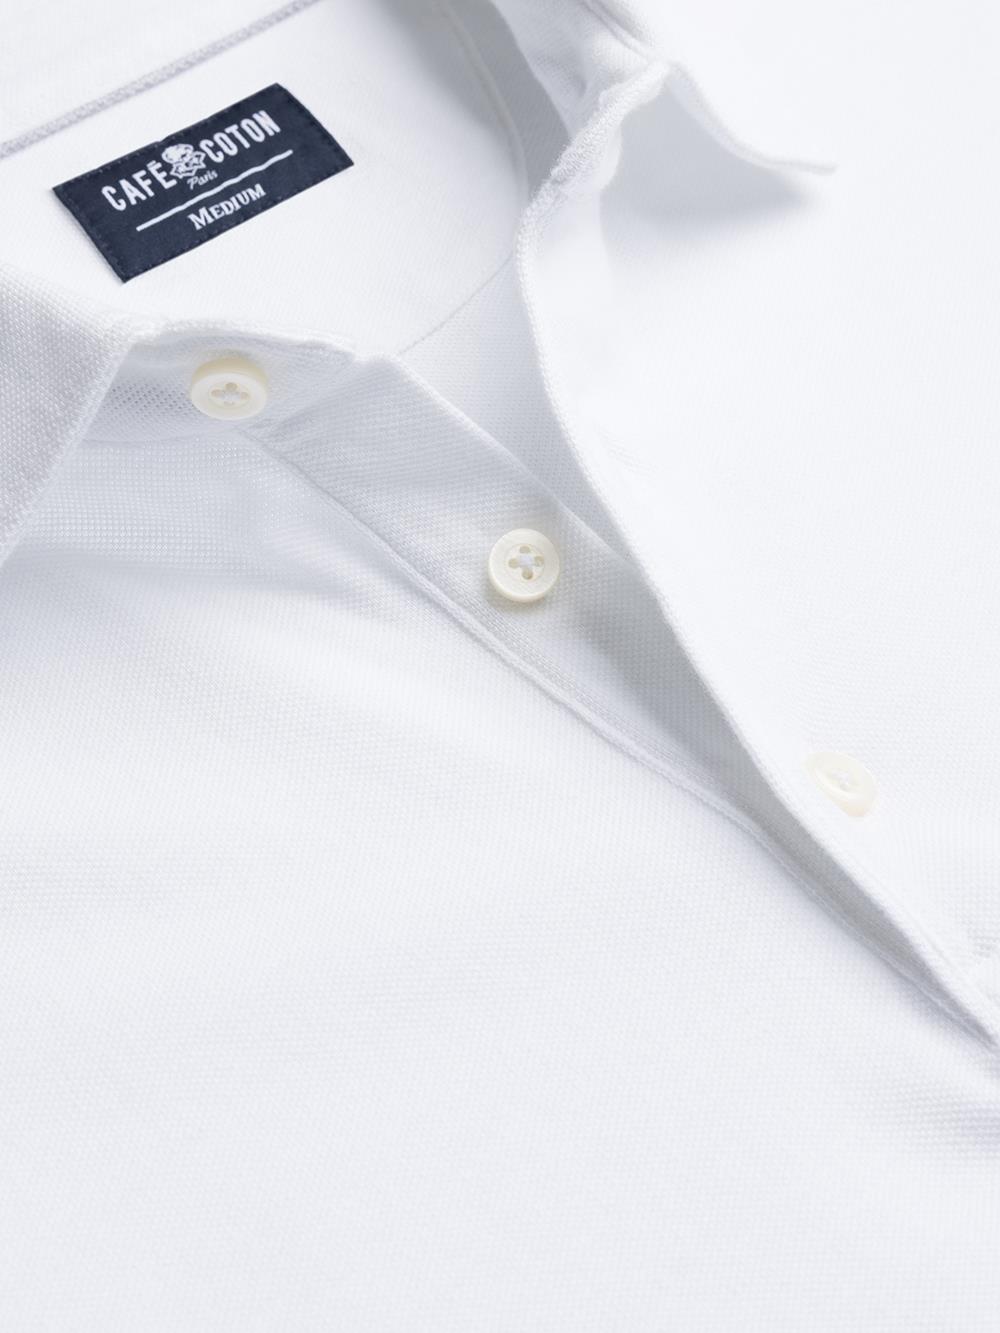 Heritage polo shirt in white piqué